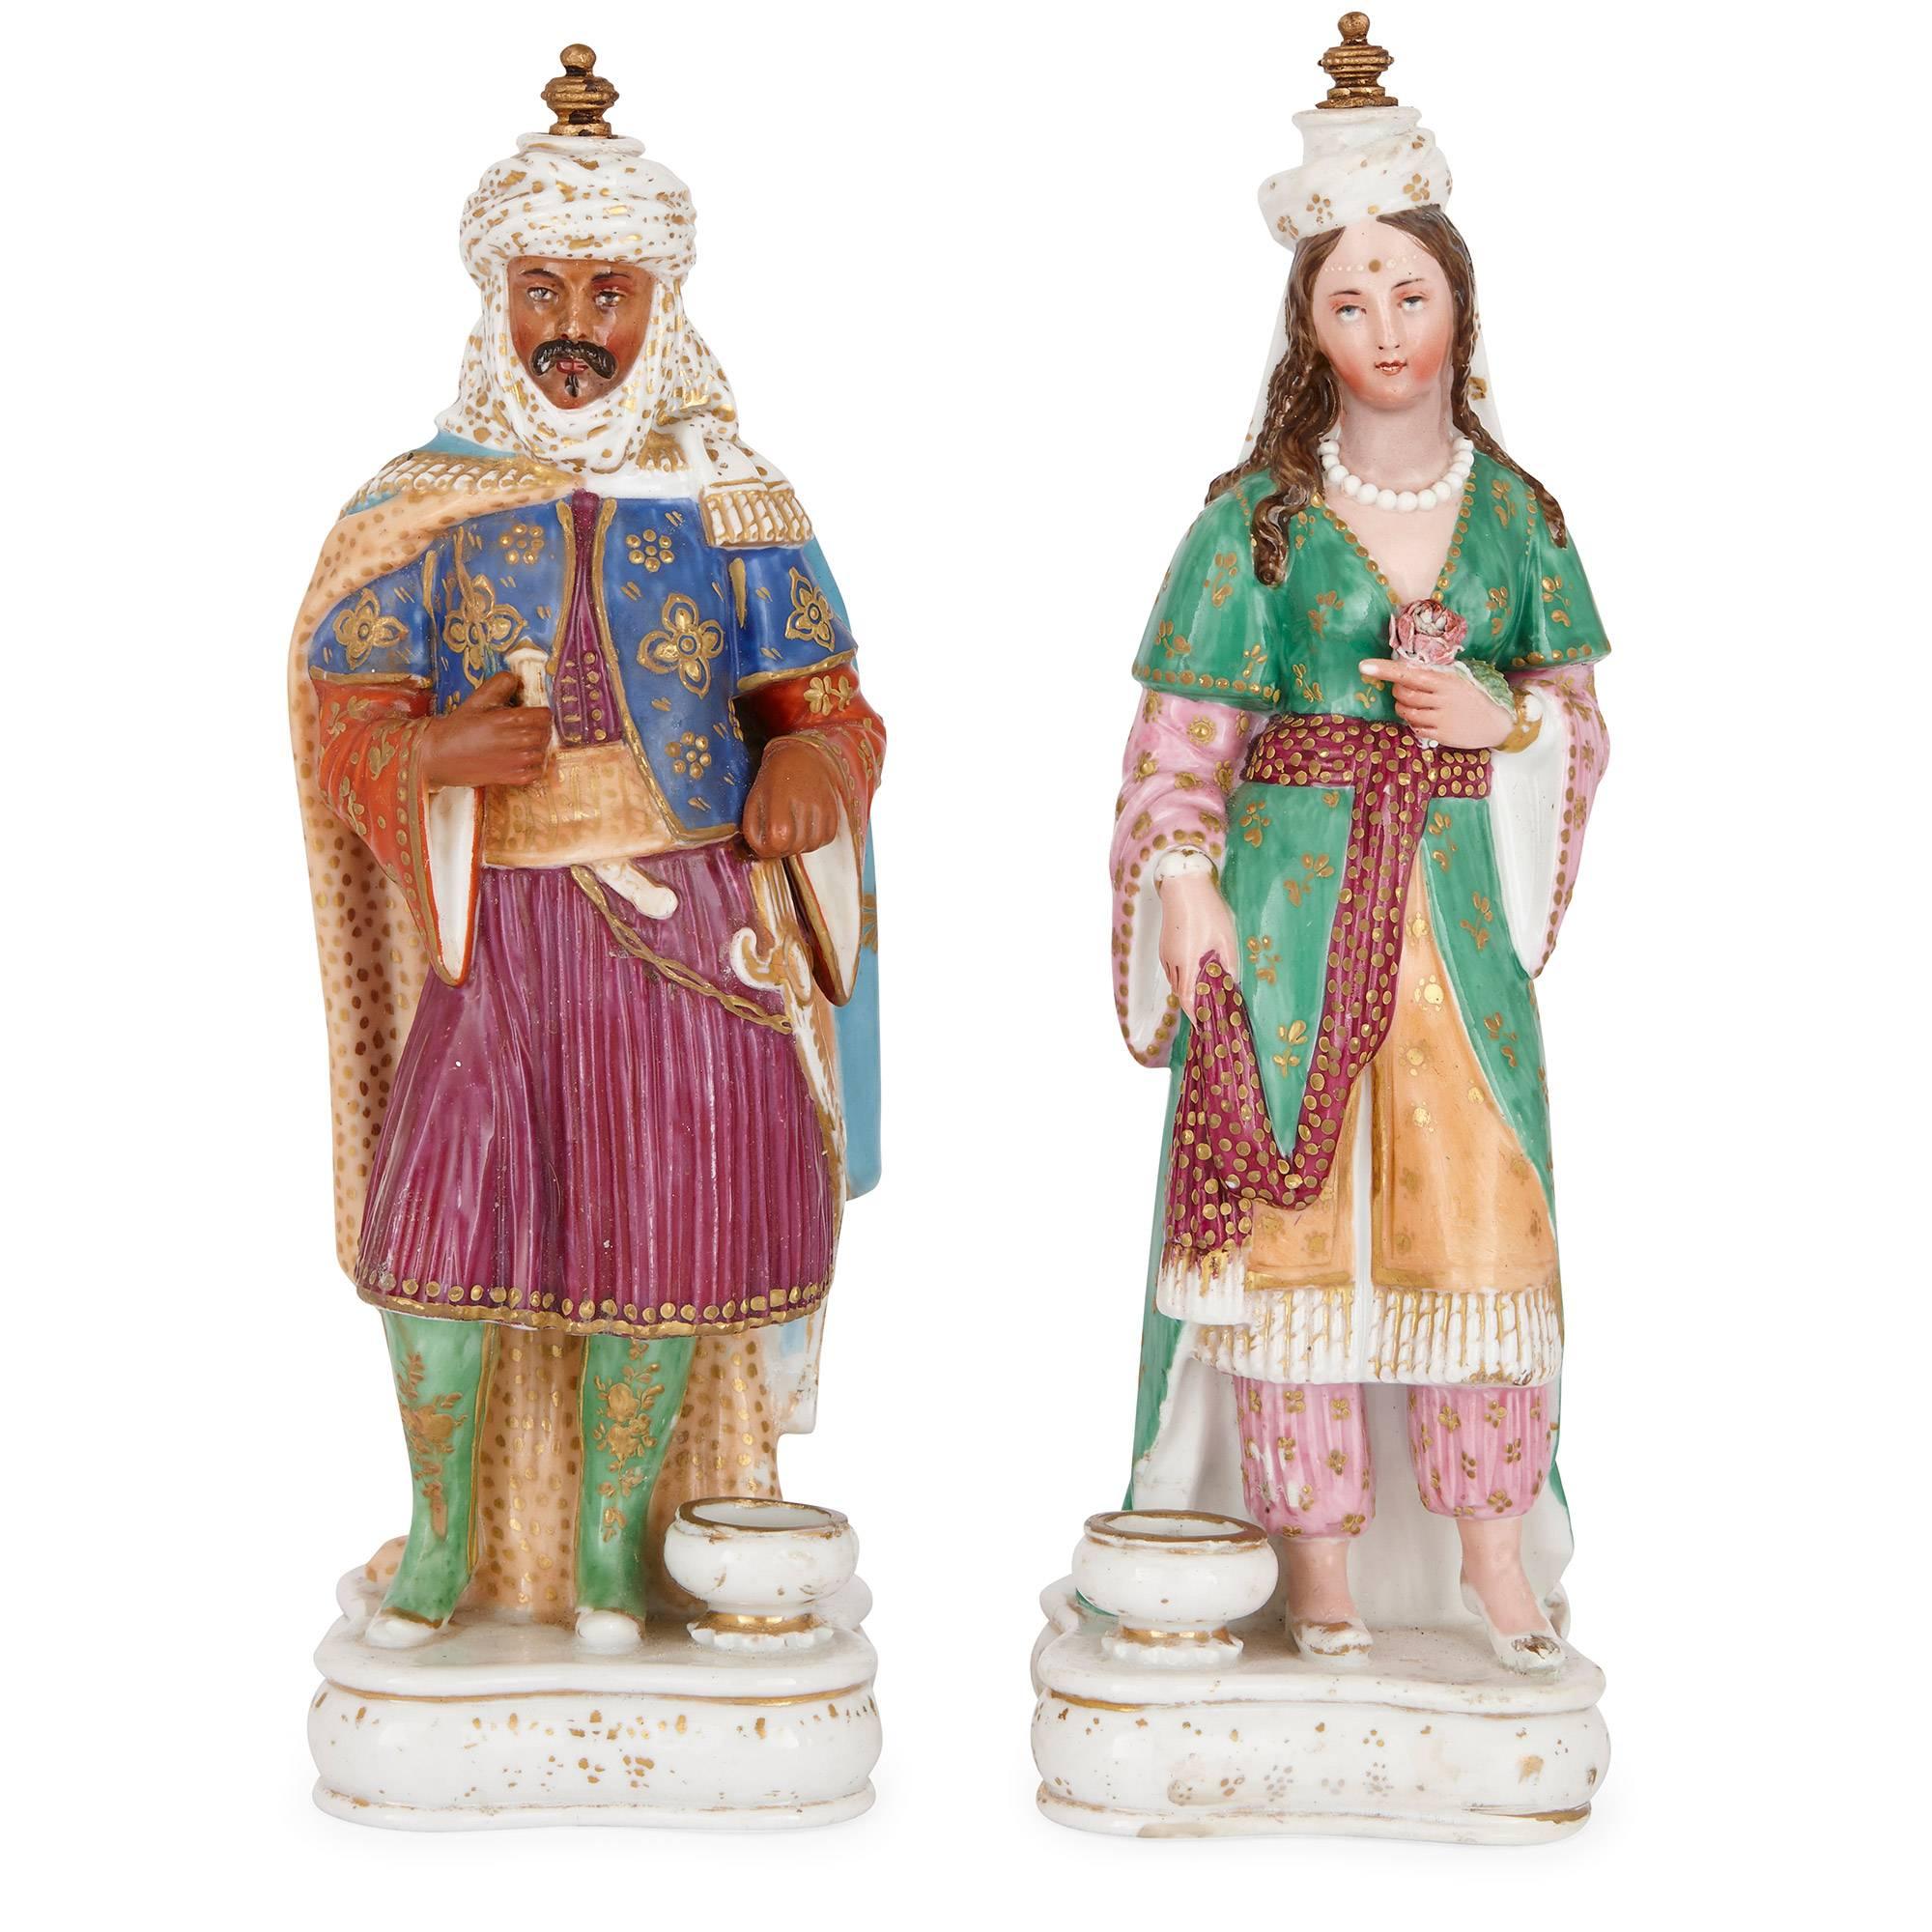 This pair of antique porcelain perfume bottles are made entirely of porcelain by Jacob Petit, a renowned maker who trained at the Sevres Manufactory. The bottles are styled as a man and a woman in Turkish wedding dress with poly-chromatic paint and